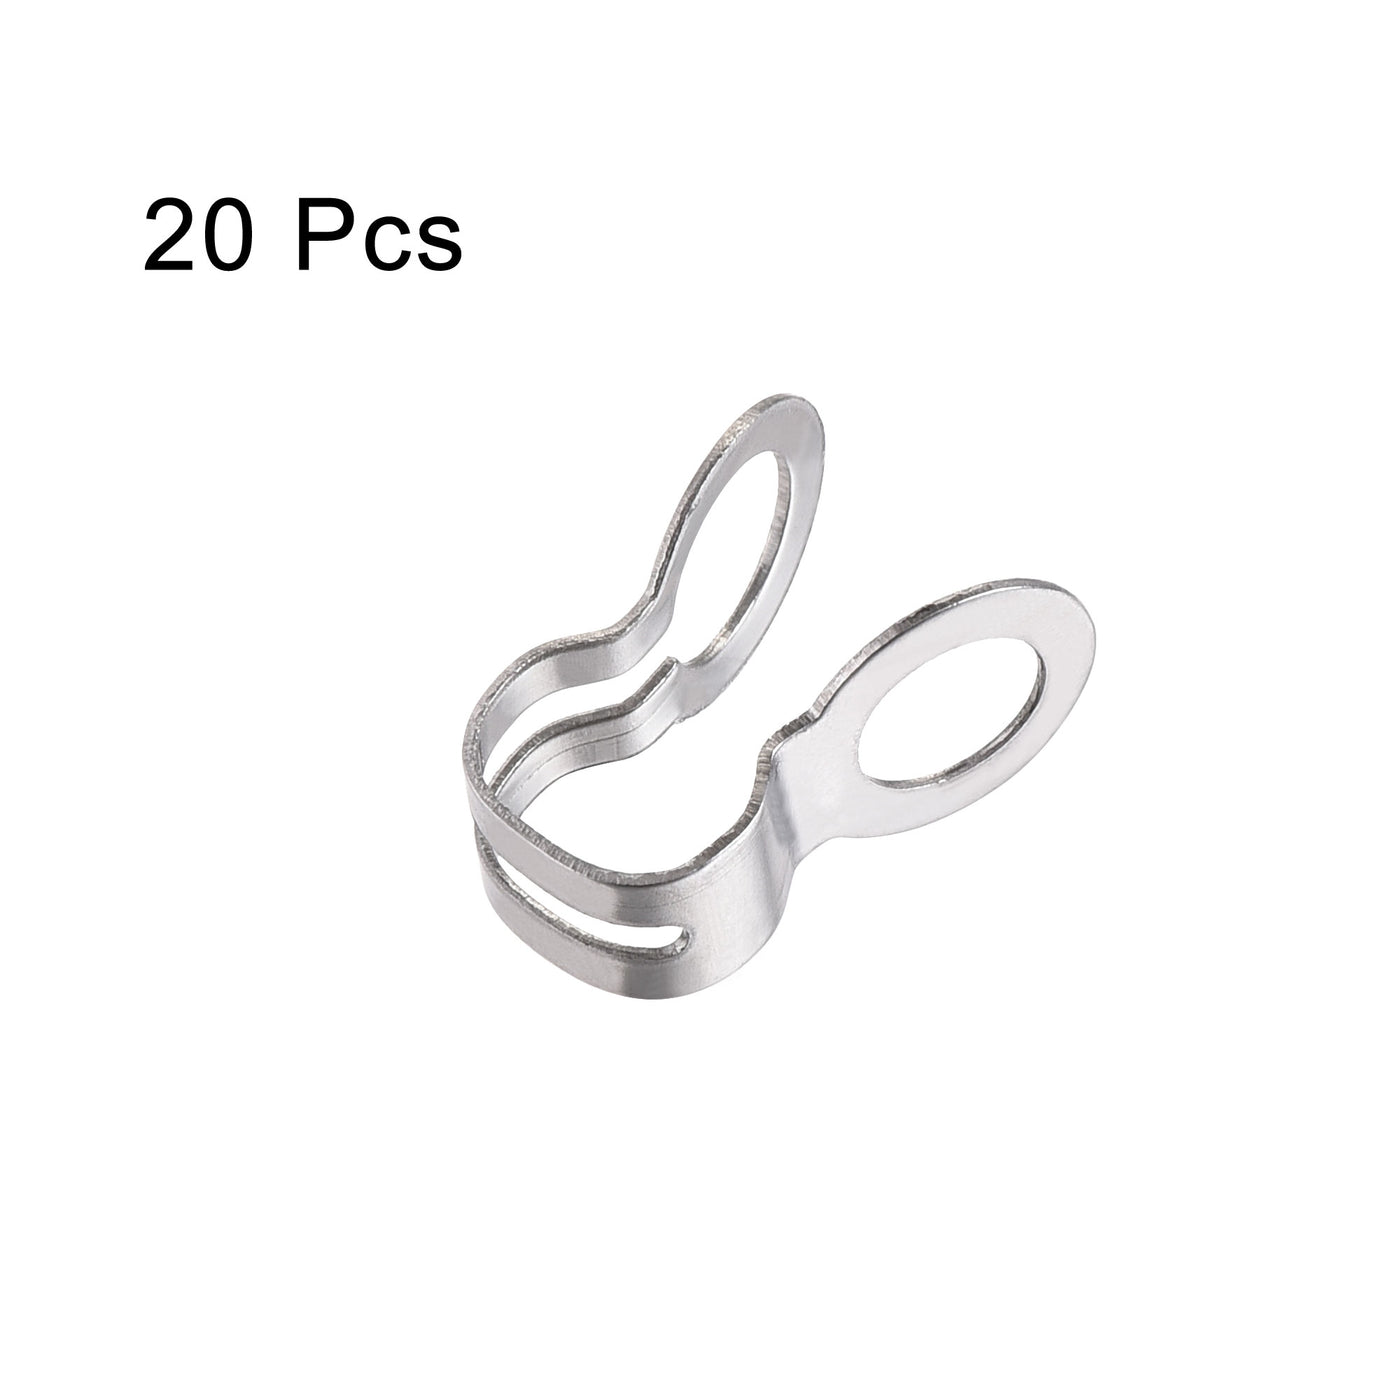 Uxcell Uxcell Ball Chain Connector, 5mm Double Ring Style Link Stainless Steel Loop Connection, Pack of 20